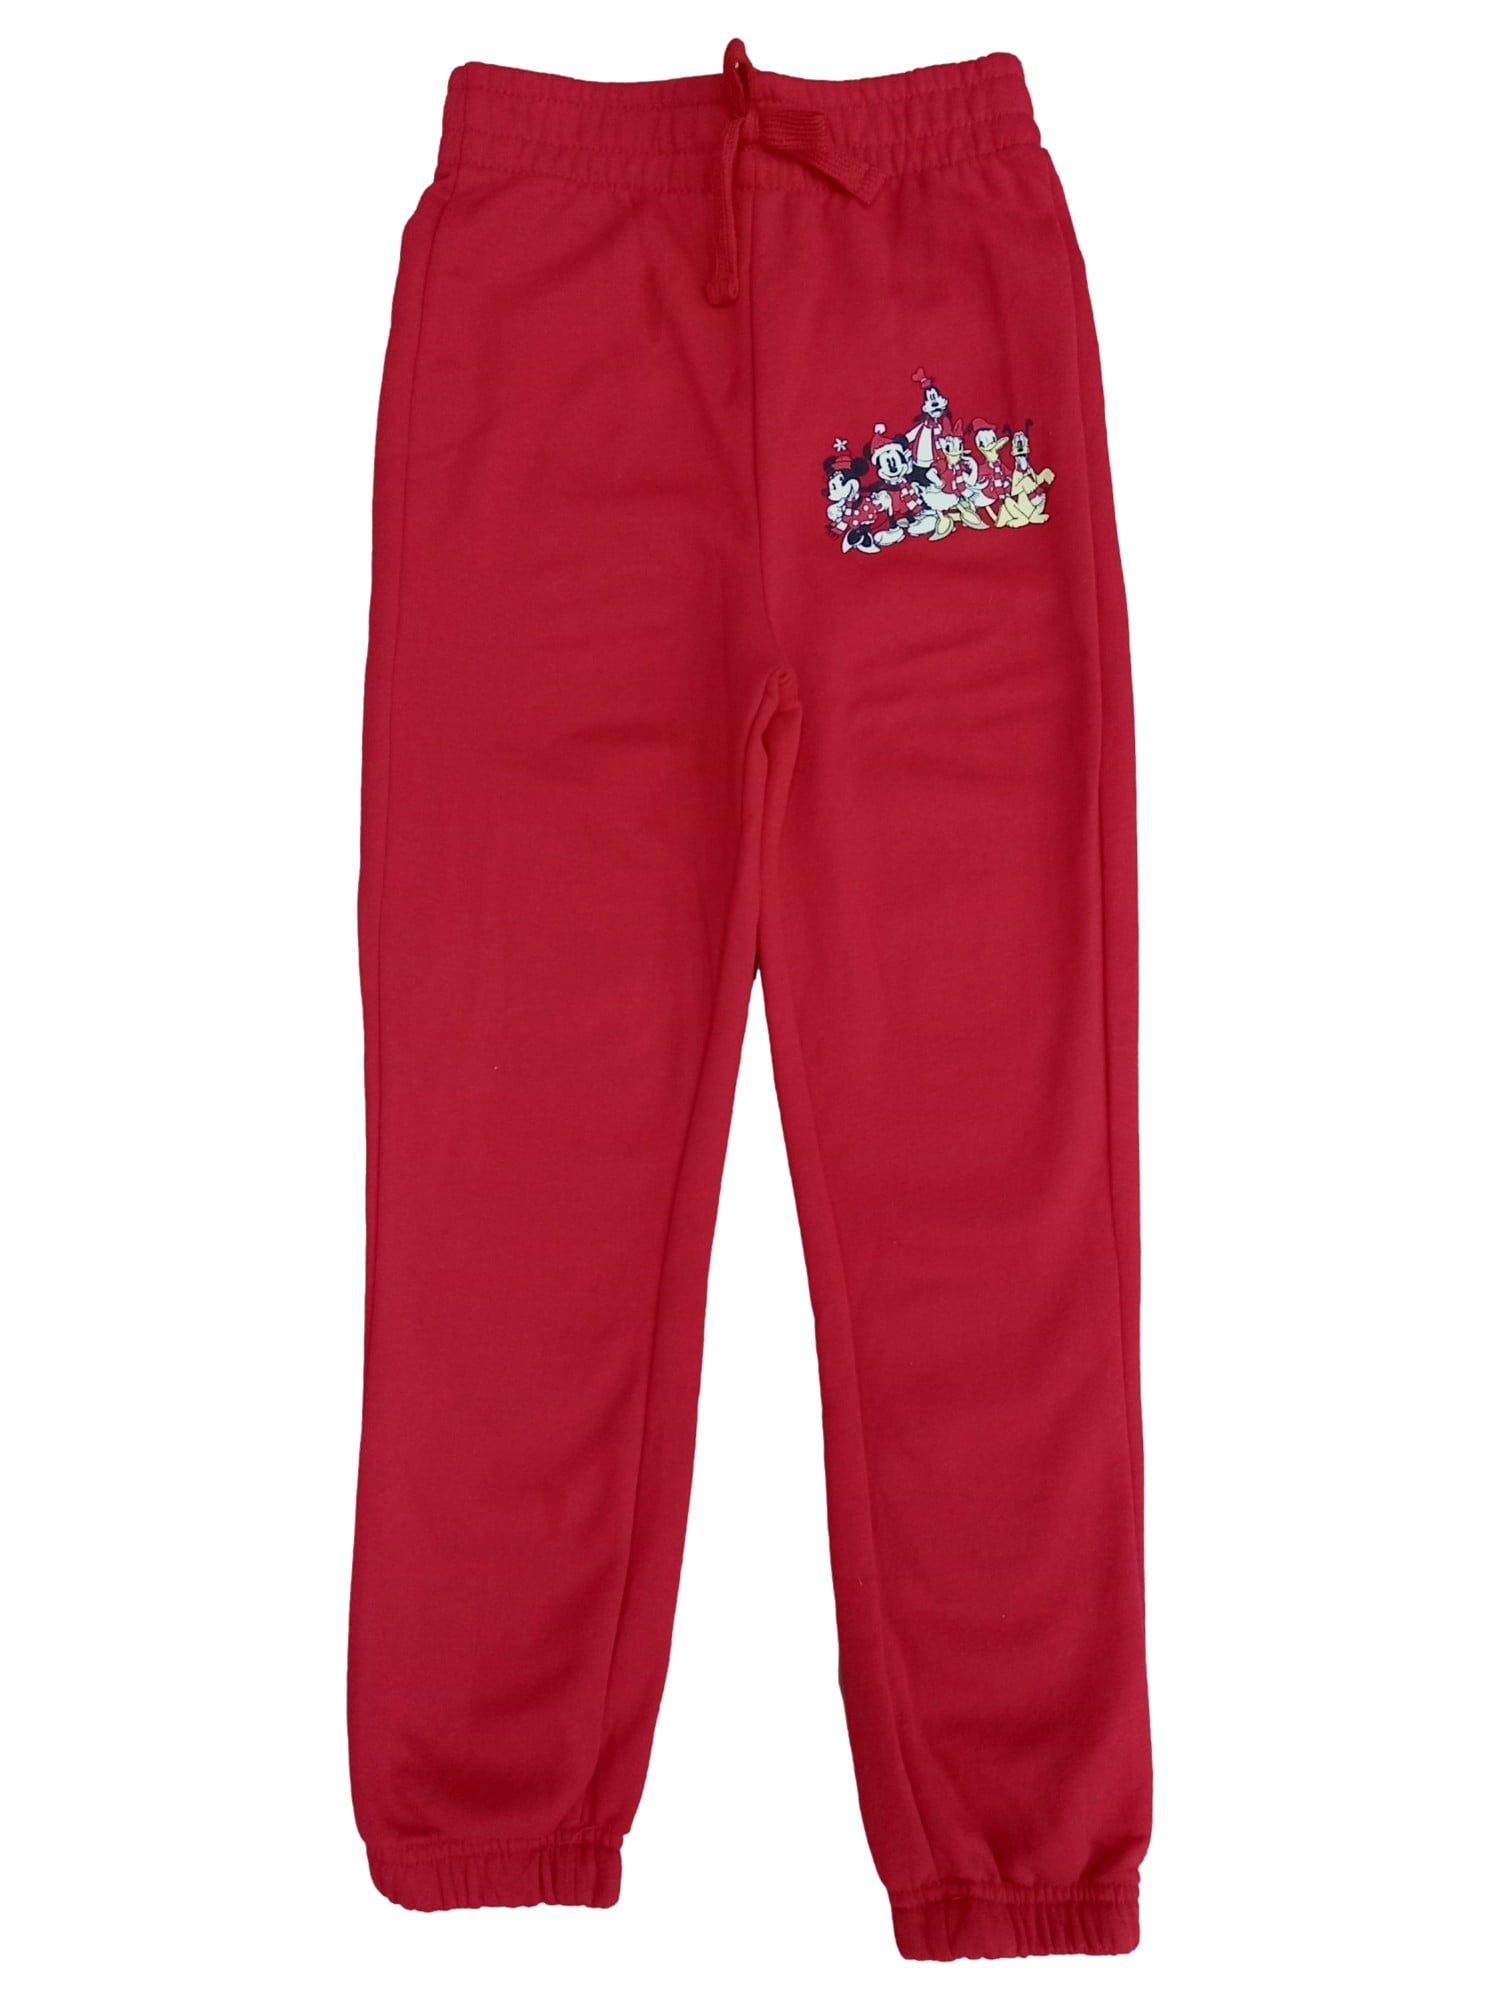 Womens Red Disney Mickey Mouse Christmas Joggers Sweat Pants XX-Large